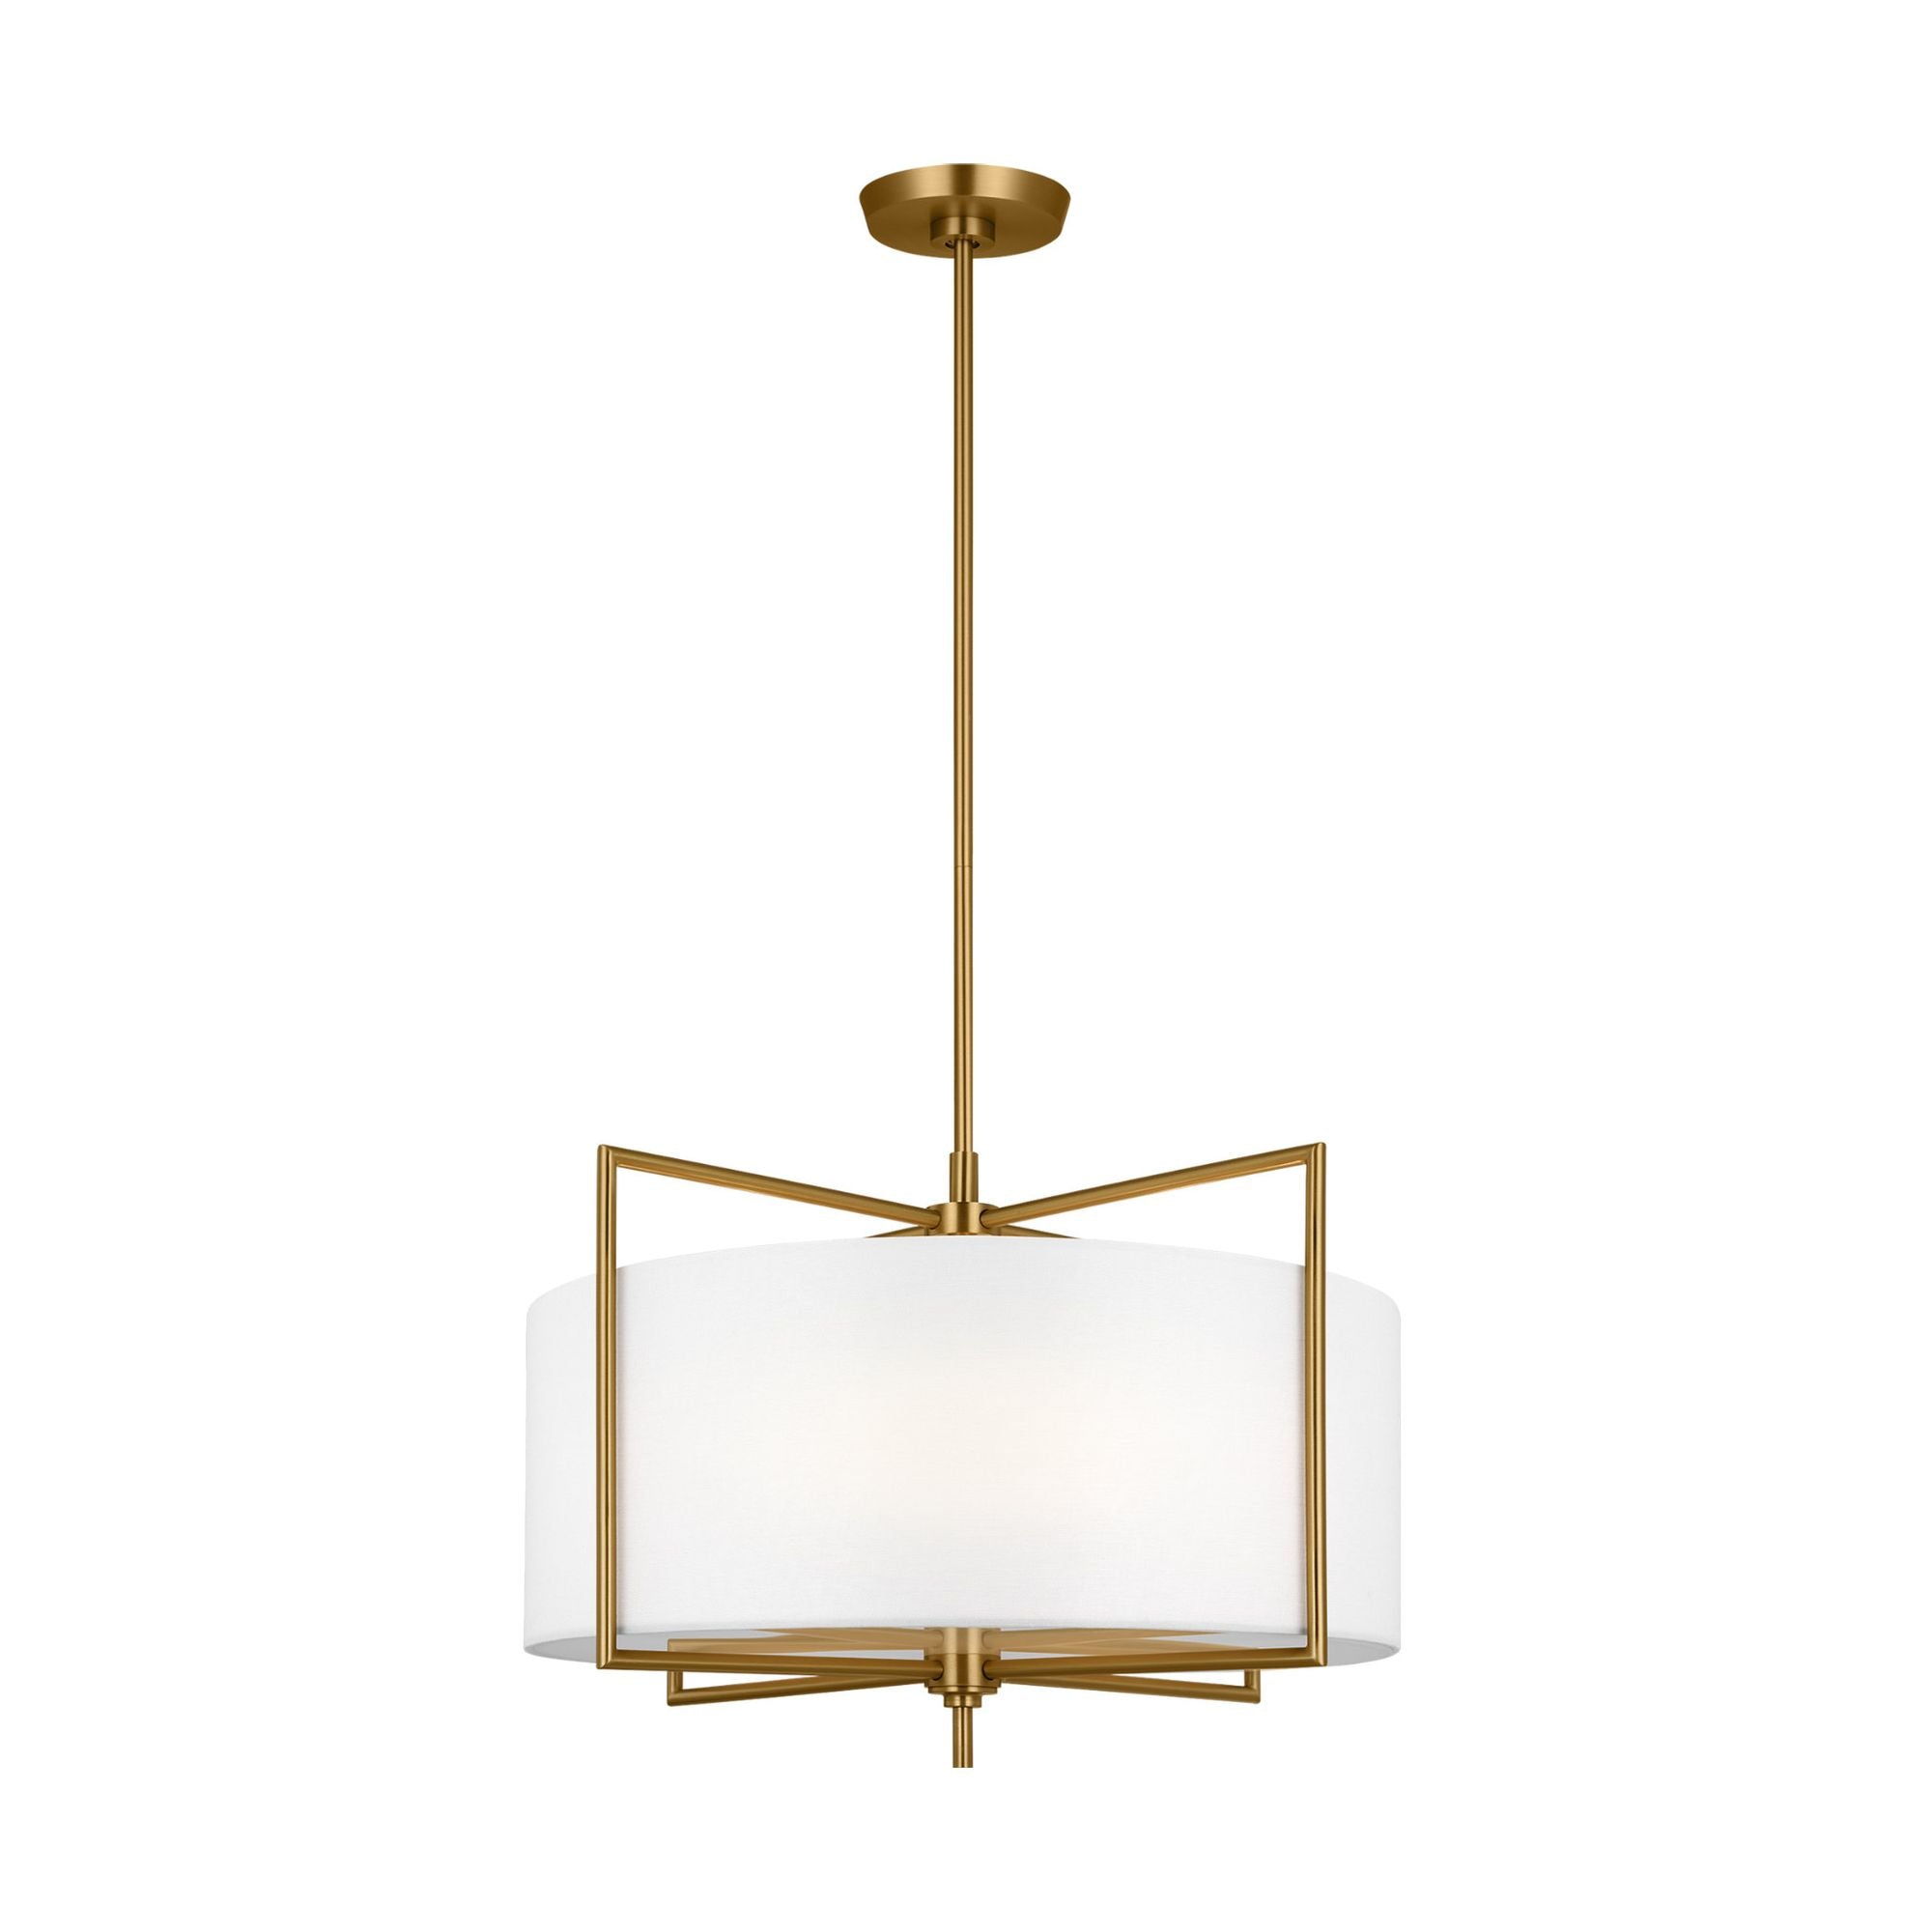 Chapman & Myers Perno Medium Hanging Shade in Burnished Brass